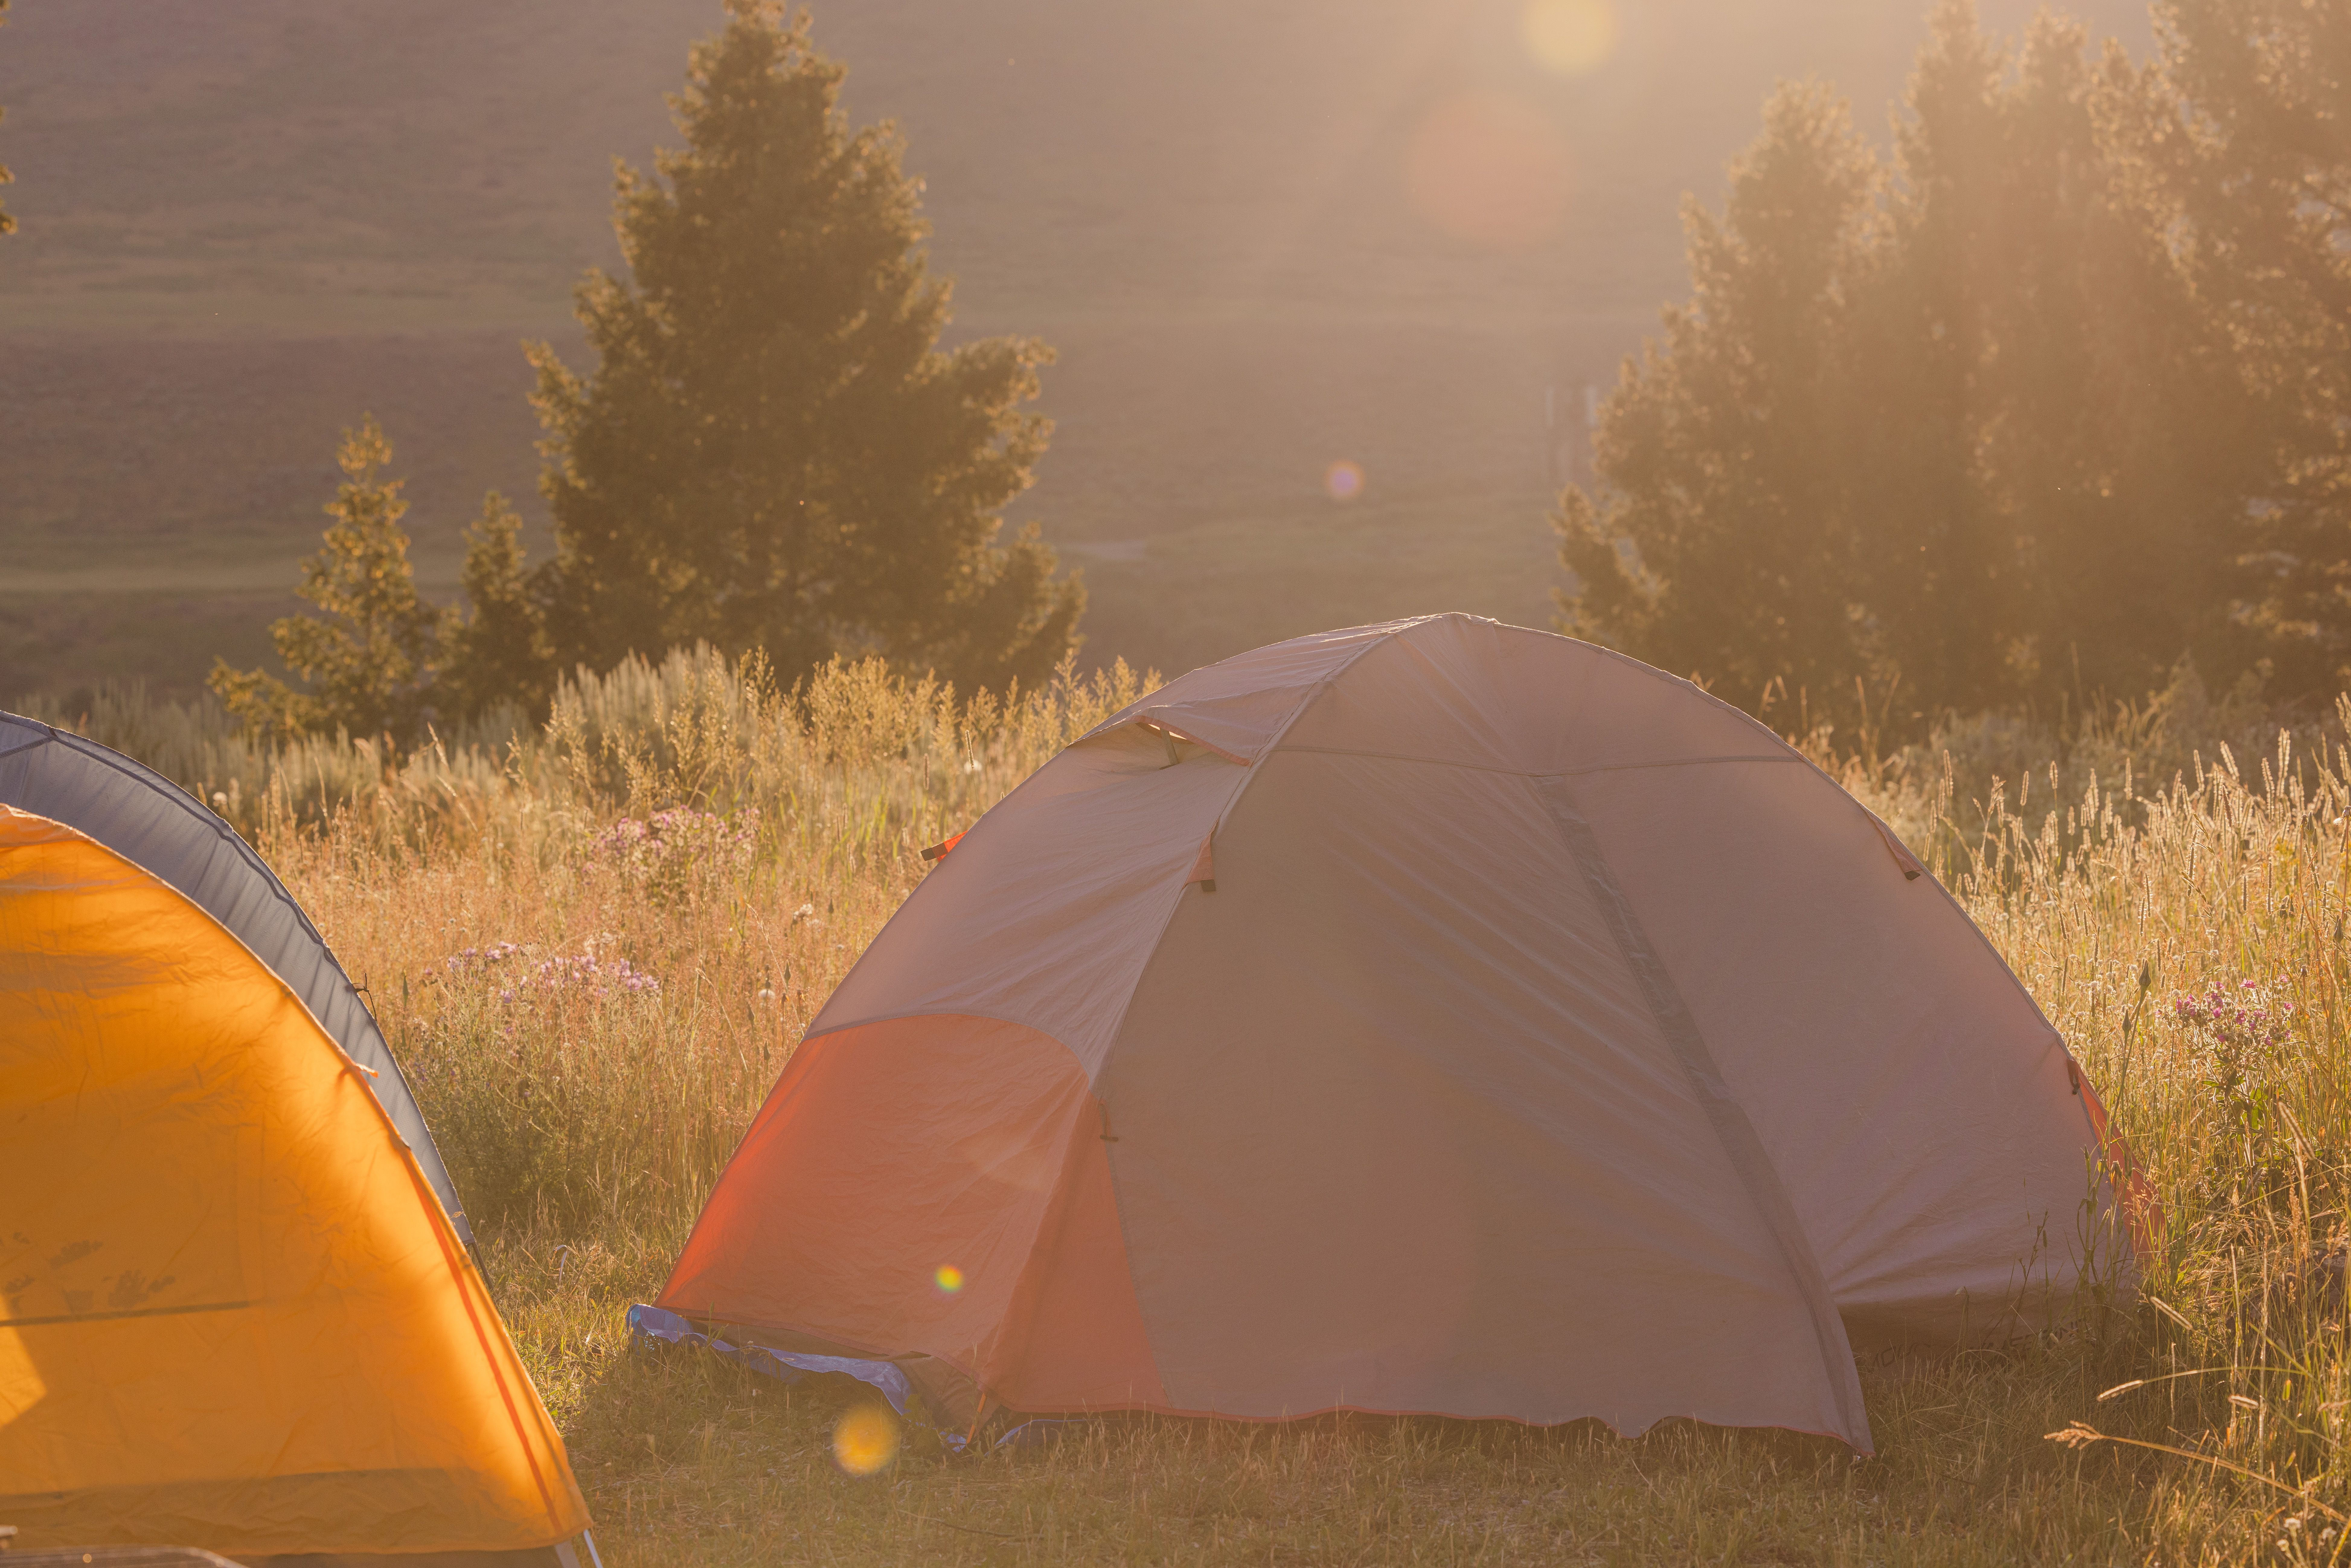 [Image Description: Two tents are illuminated by the sunrise in a field.]